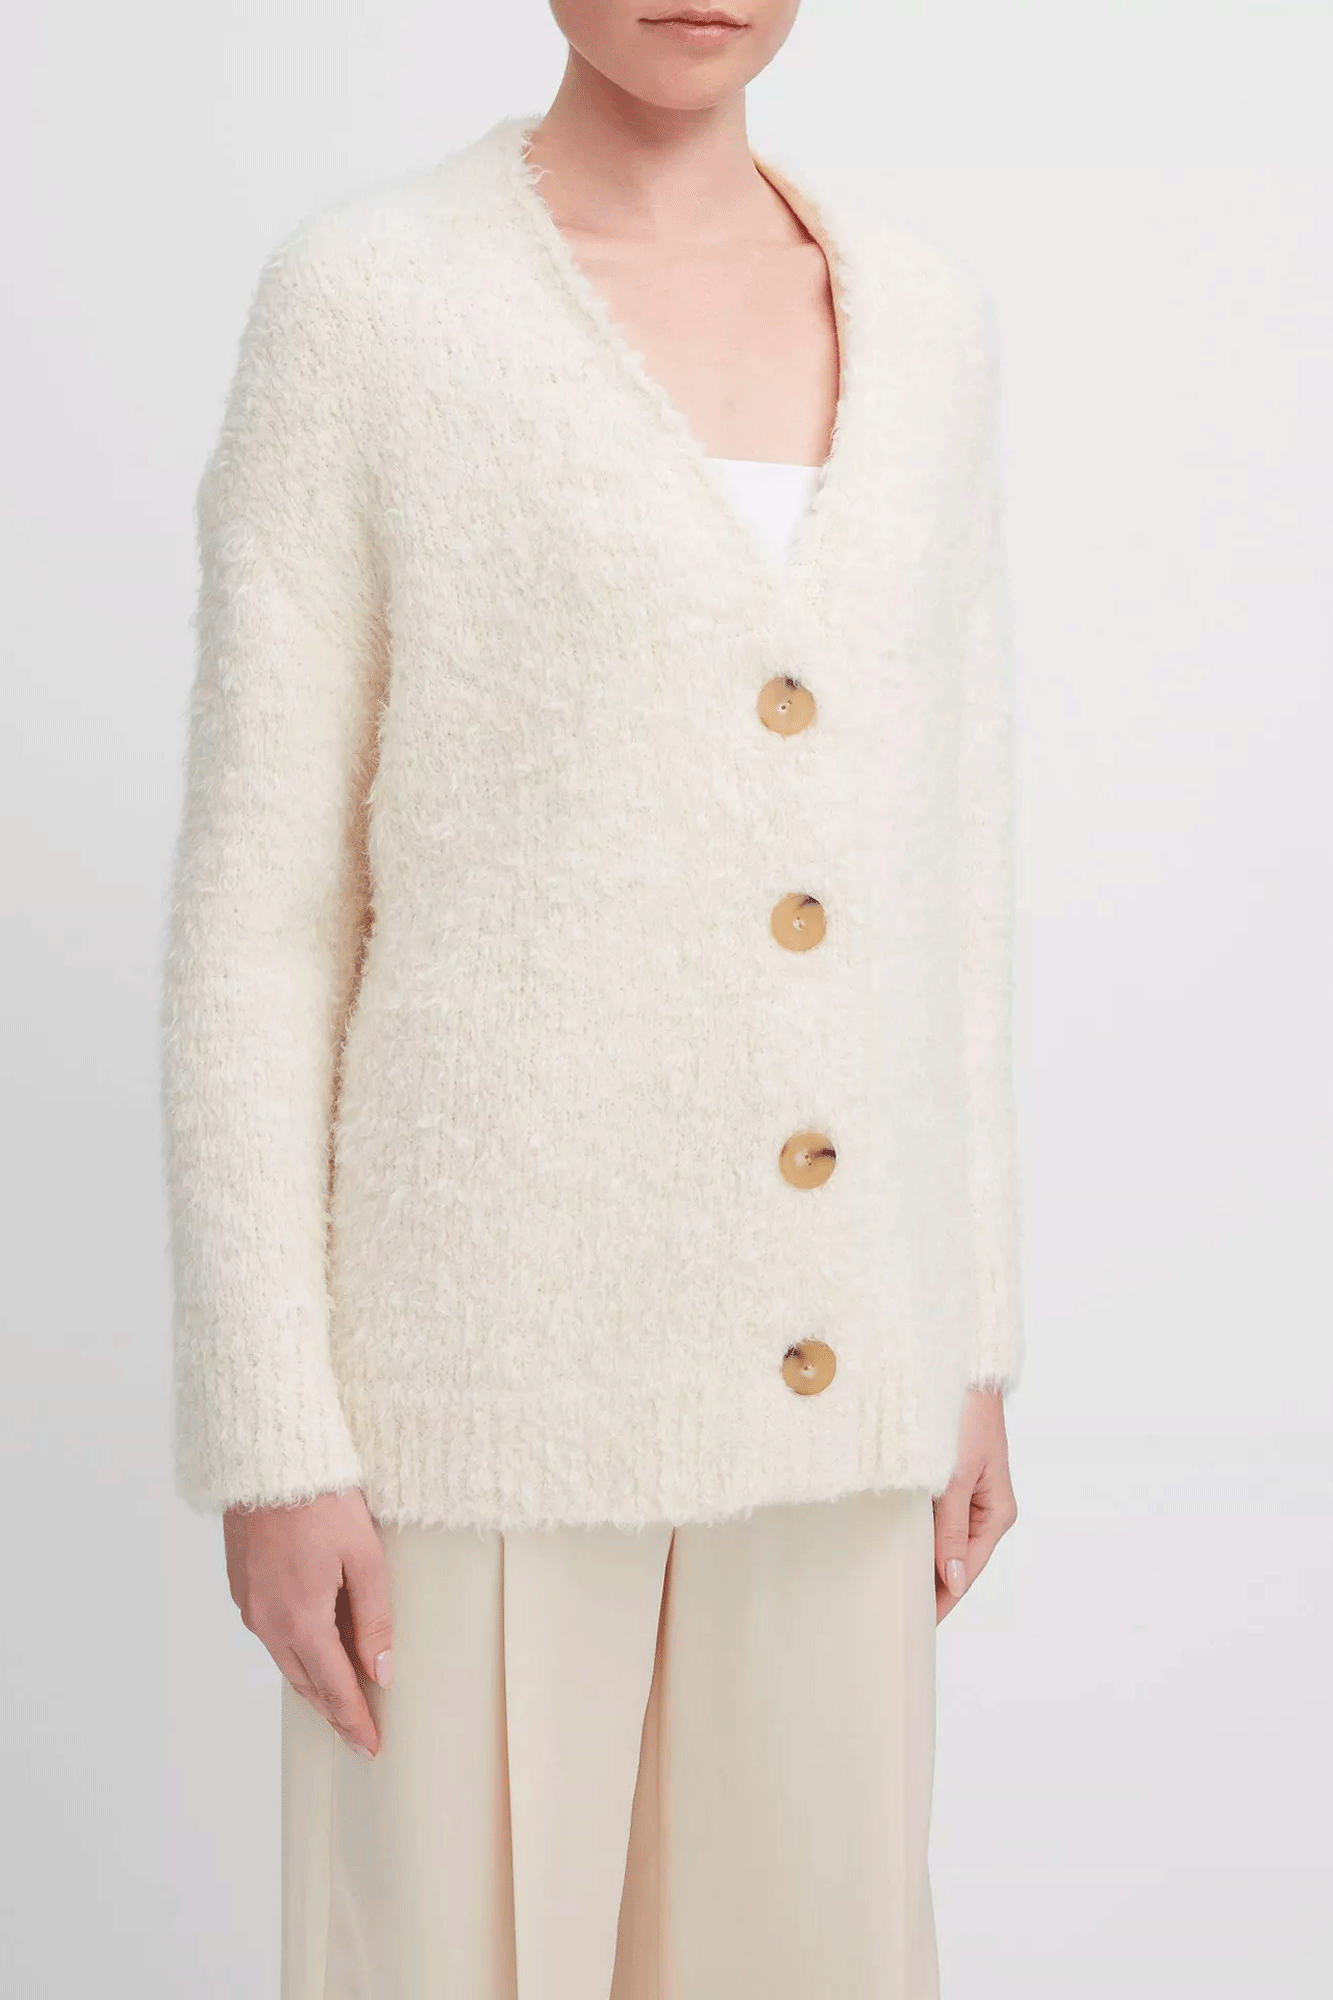 The Oversized Teddy Cardigan from Vince provides the perfect combination of warmth and luxury. Knit from a blend of alpaca and wool, this cardigan will envelop you in comfort while still providing a stylish look. Designed in Italy, this cardigan is sure to be a wardrobe favorite.